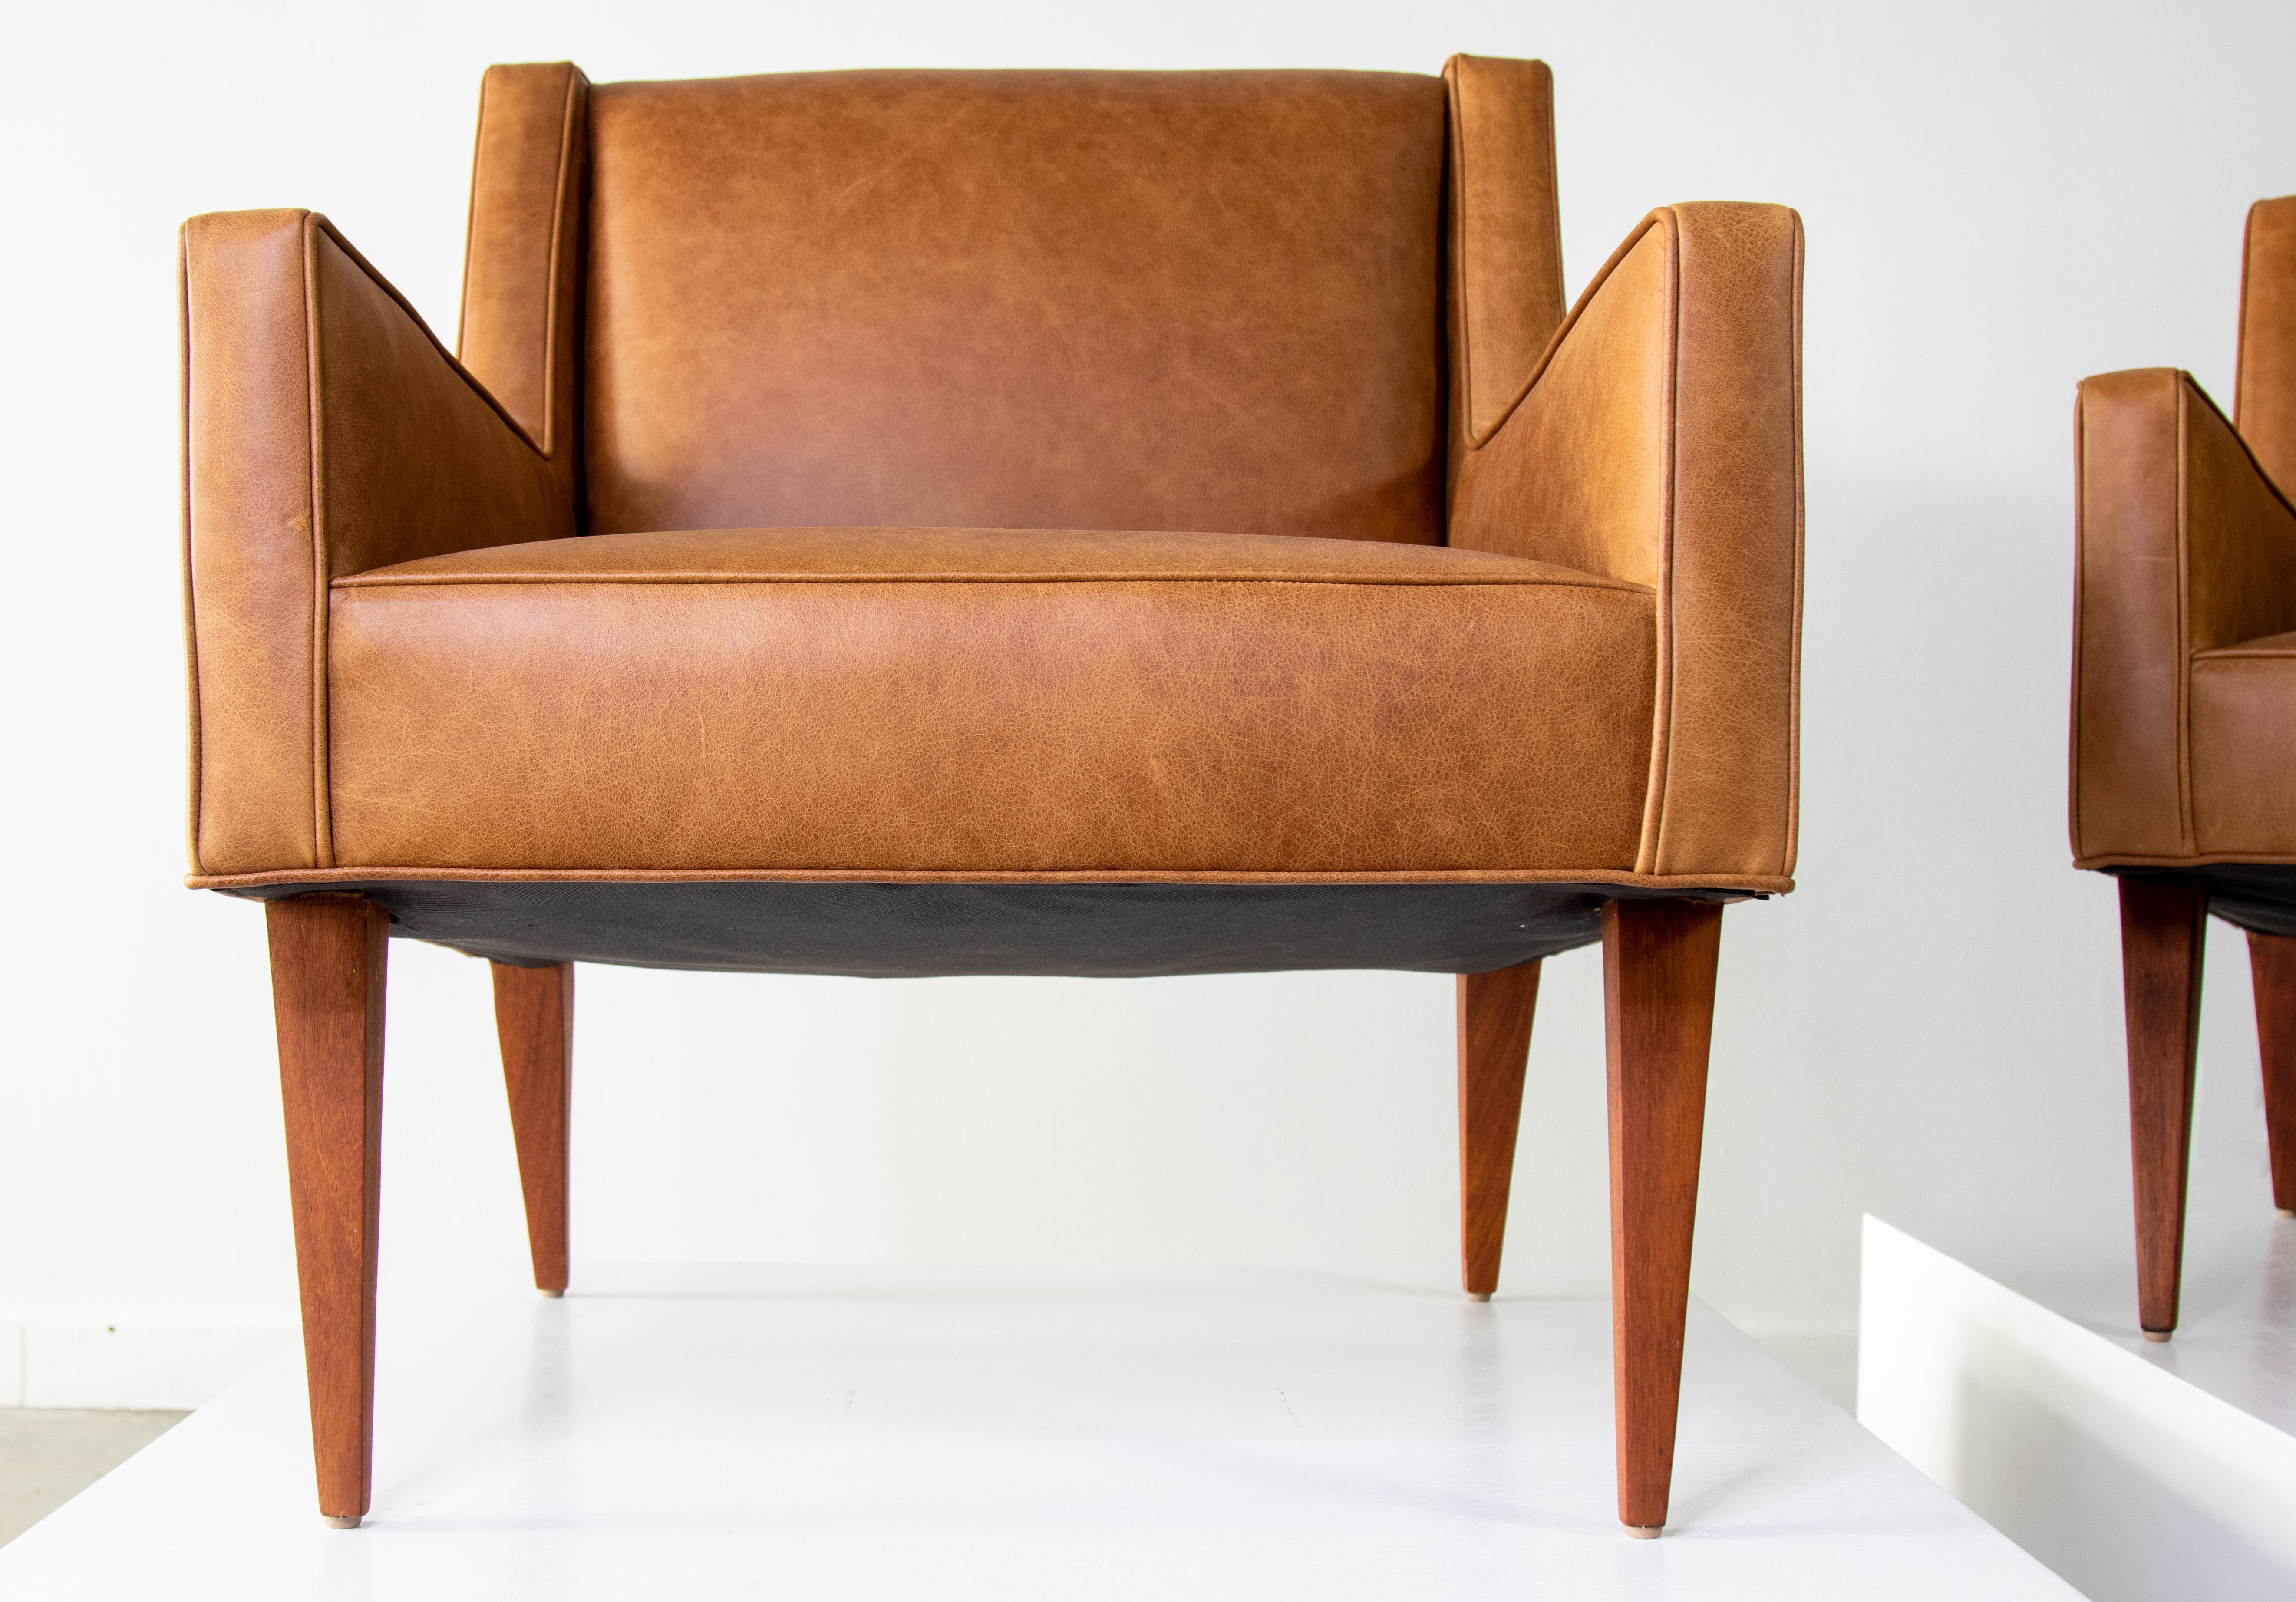 Mid-20th Century 1950s Edward Wormley for Dunbar pair of leather lounge chairs no. 603 Mrs. Chair For Sale